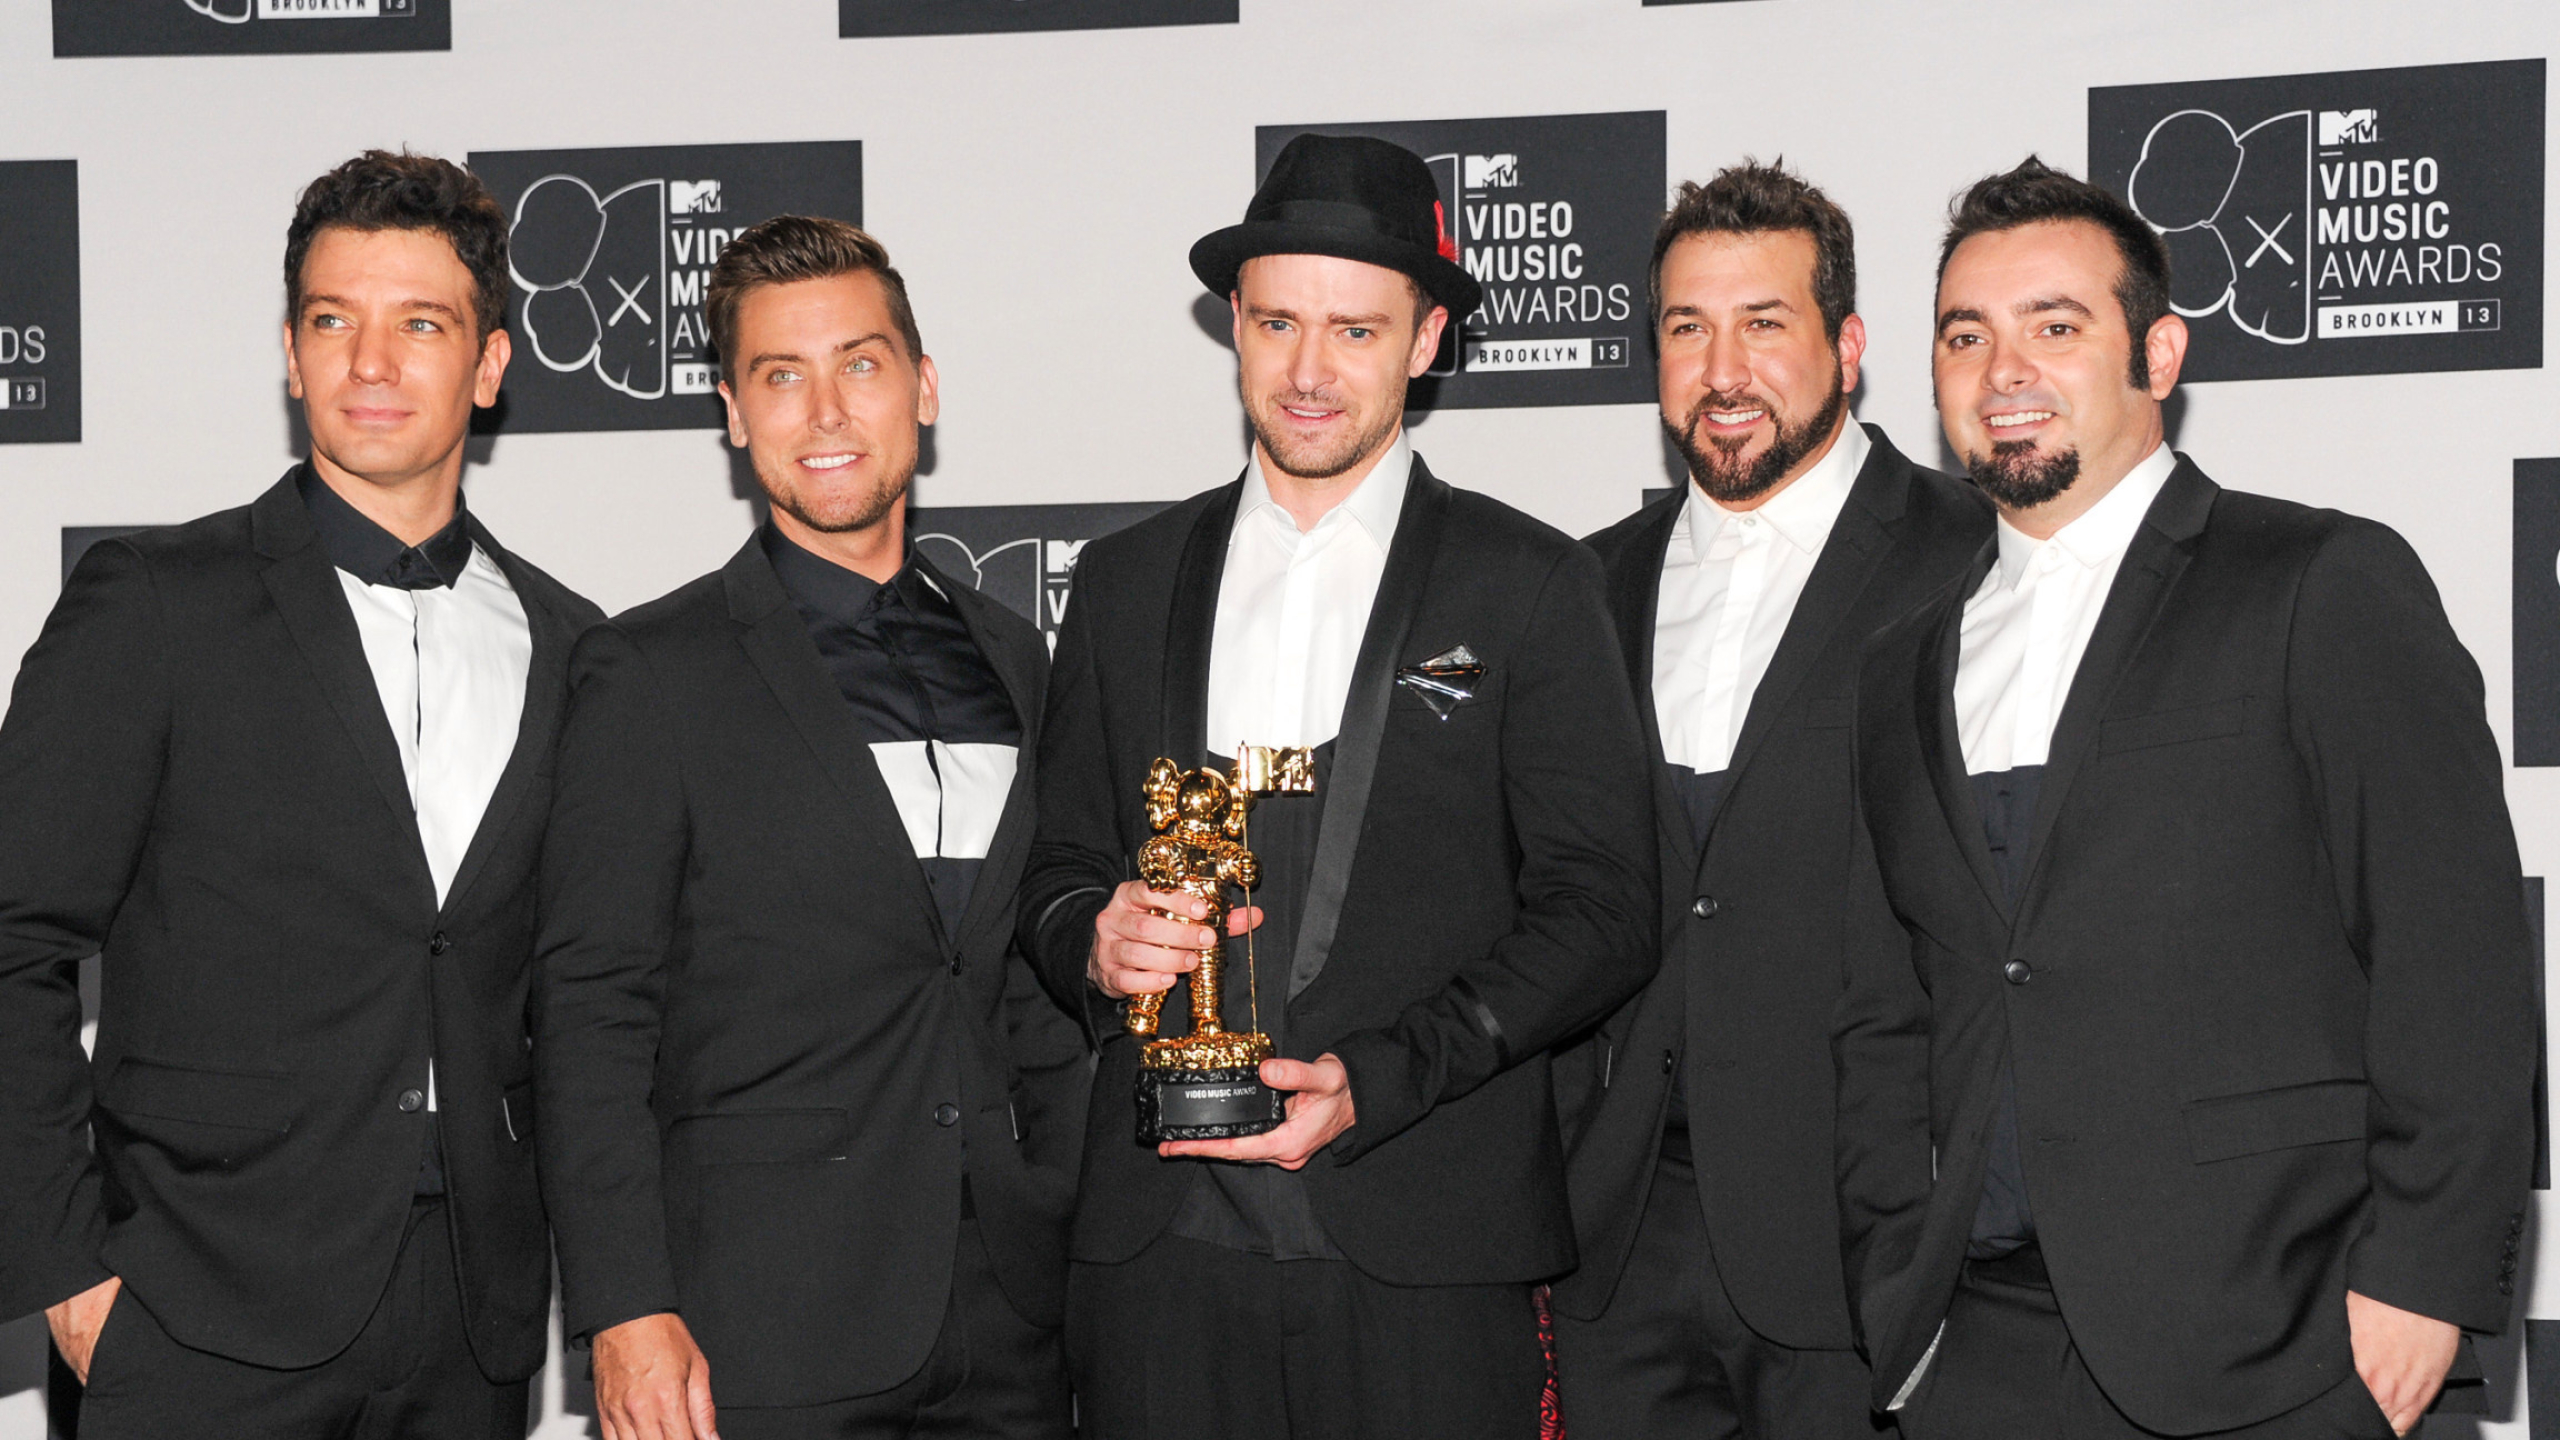 NSYNC wallpapers, Striking visuals, Iconic boy band, Music-themed backgrounds, 2560x1440 HD Desktop